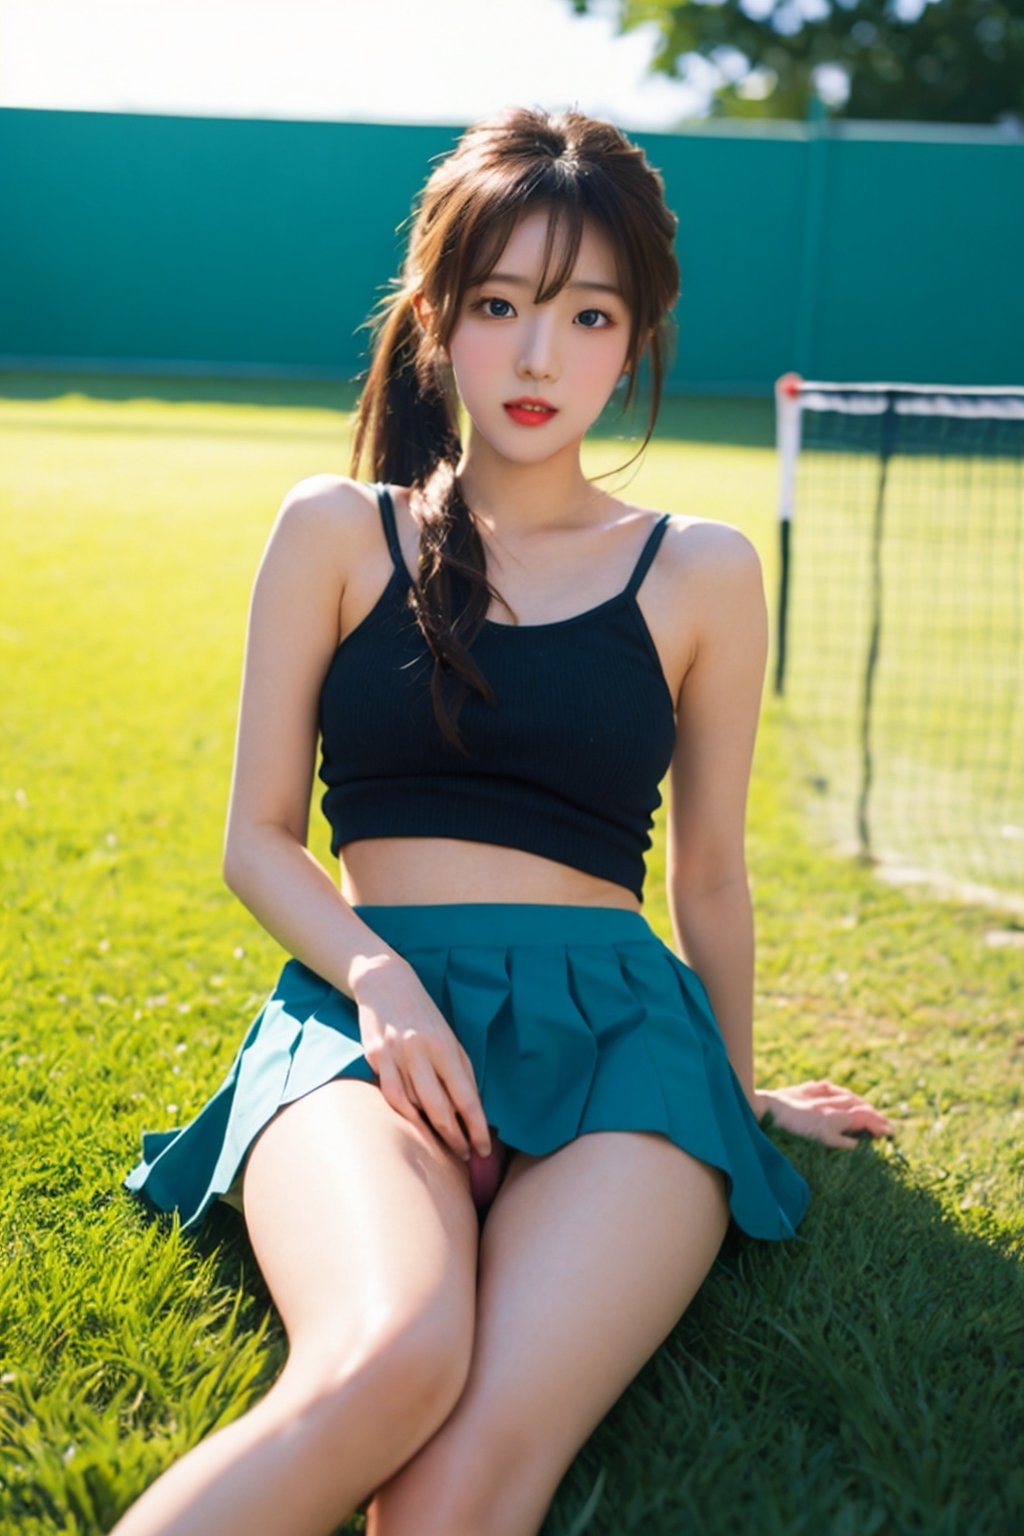 20 years old korean girl, korean idol style,masterpiece, best quality, photorealistic, raw photo, 1_girls,long_ponytail,medium_breasts,sexy pose,naked,unclothed,tennis skirt,detailed skin, pore, low key,
a green lawn,real hands,spreading_leg,very wide spreading leg,female_masturbation,masterbating,jerking_off,pussy,pussy_lips,seducing_face,seductive_pose,on_stomach,little_cute_girl,blurry_light_background,Korean,Beauty,Sexy